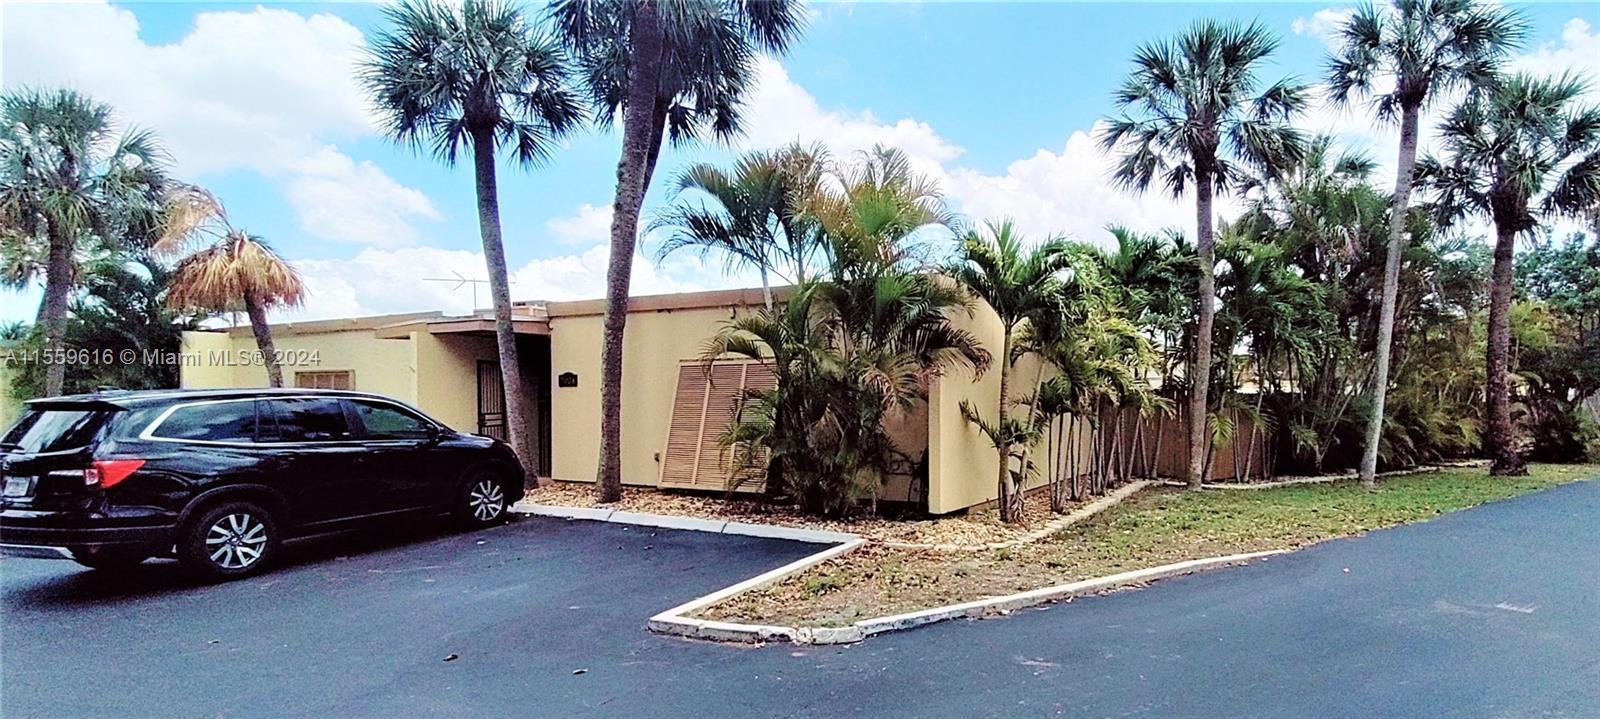 Photo of 7024 Crown Gate Dr #7024 in Miami Lakes, FL